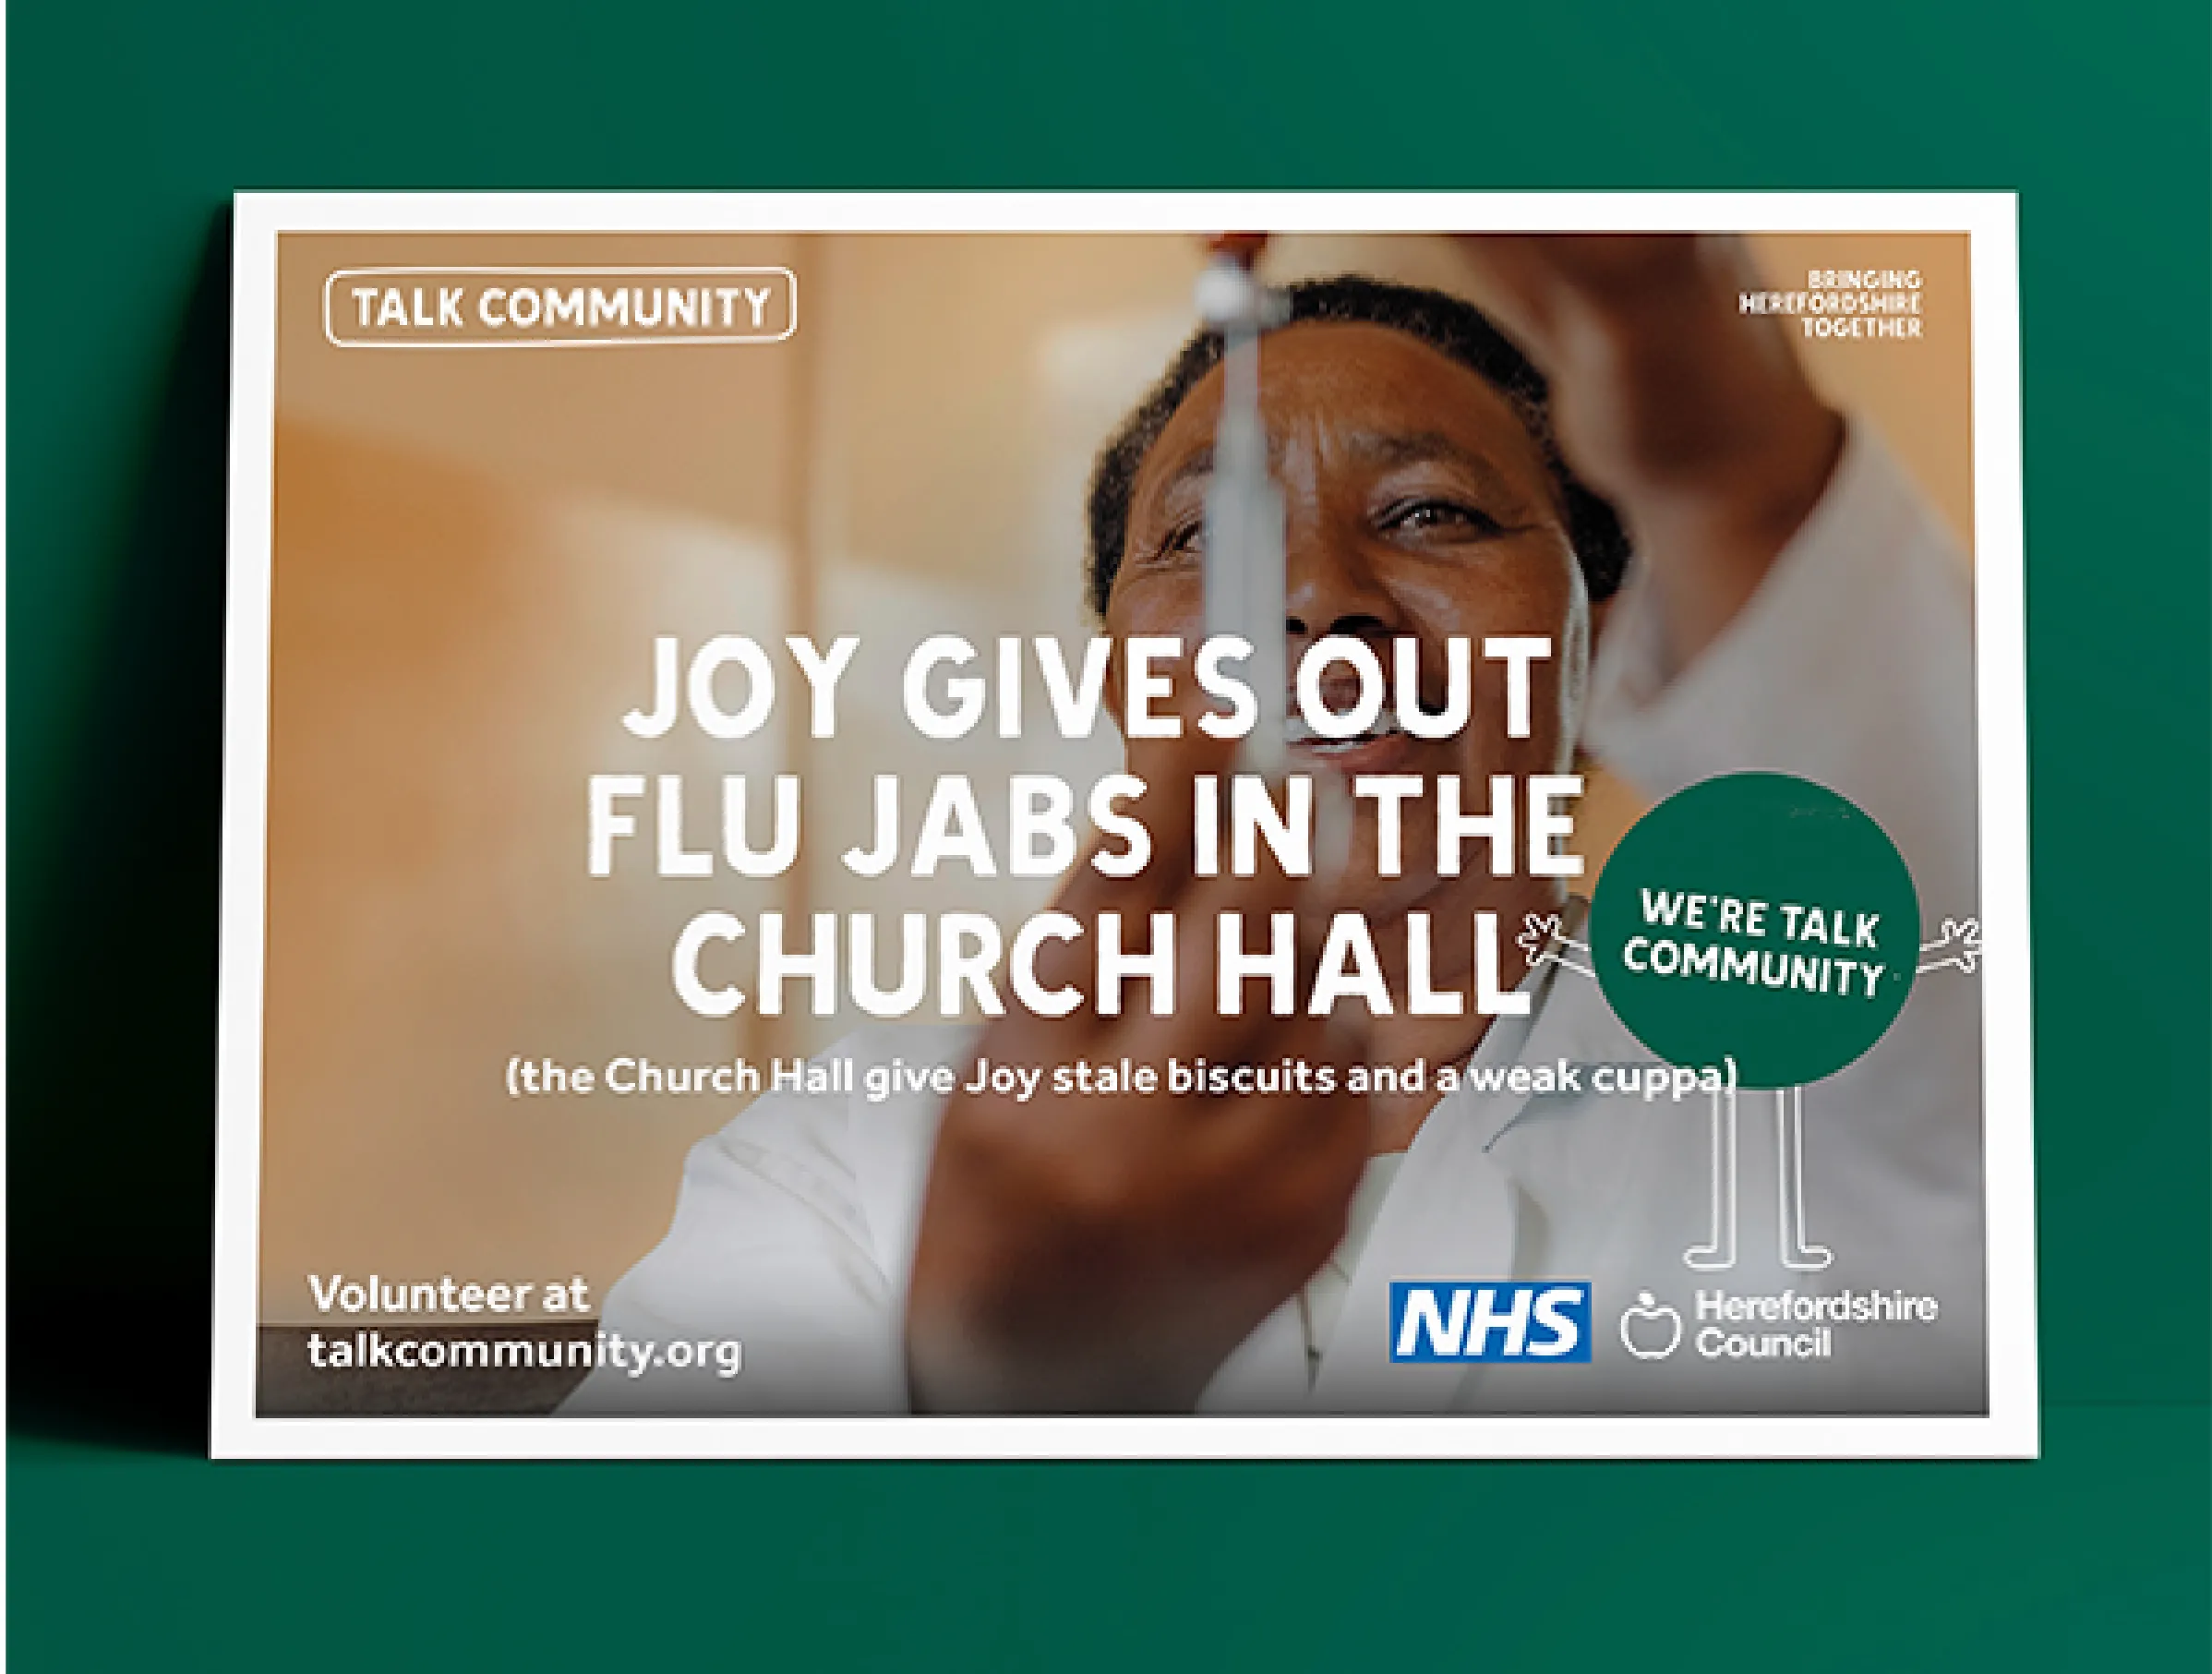 Talk Community poster with Herefordshire Council and NHS about flu jabs